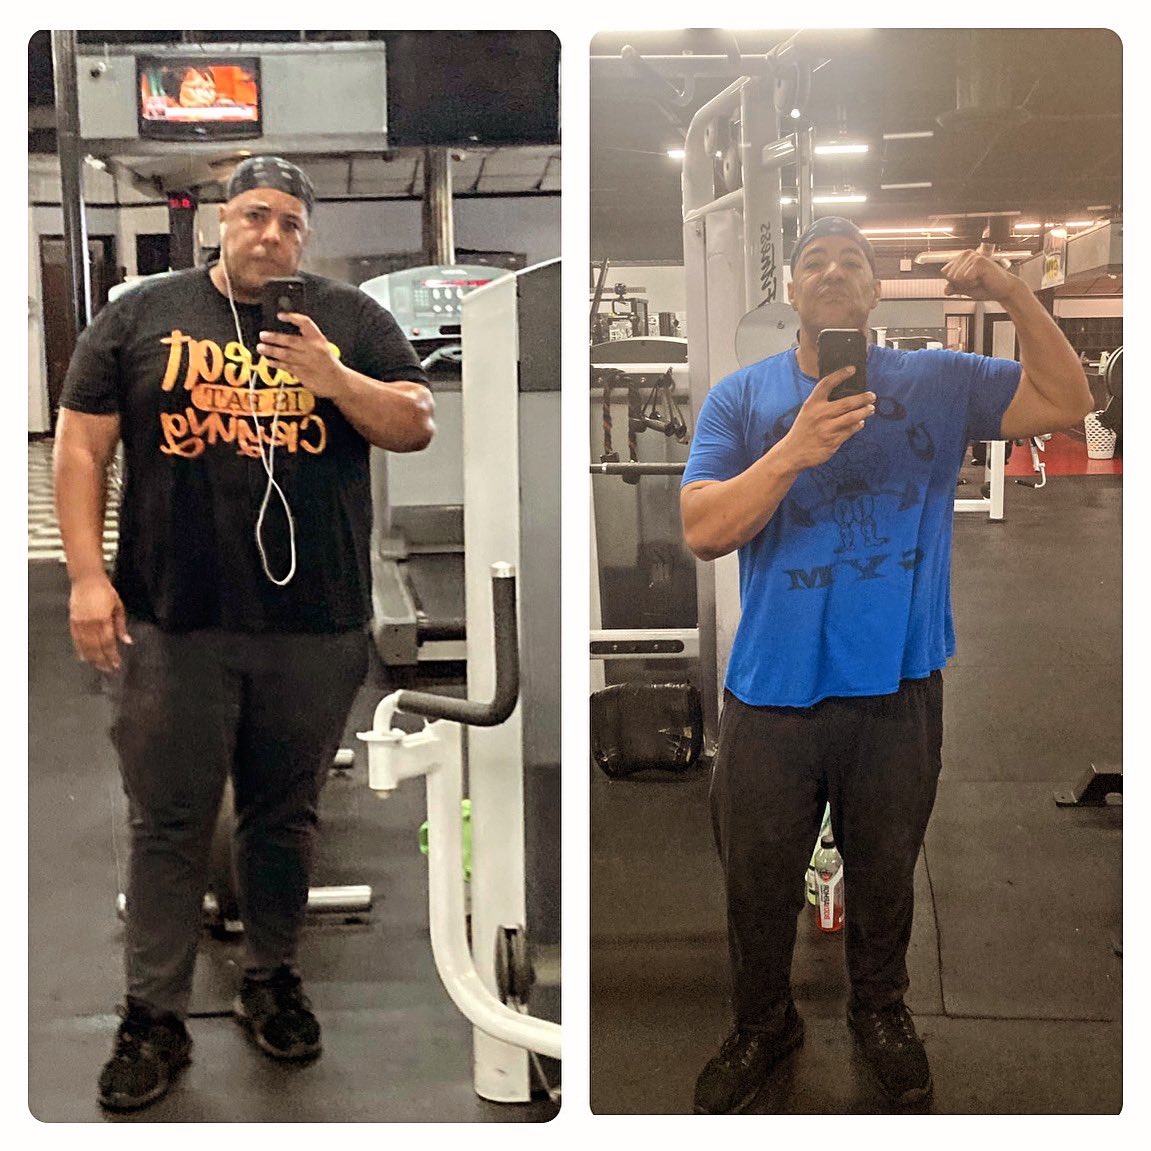 #MotivationalMonday Let’s start this #Holiday week off right! #TrainHard #StayConsistent #NeverGiveUp and #AlwaysBelieve #transform #weightloss #weightlossjourney #pumpiron